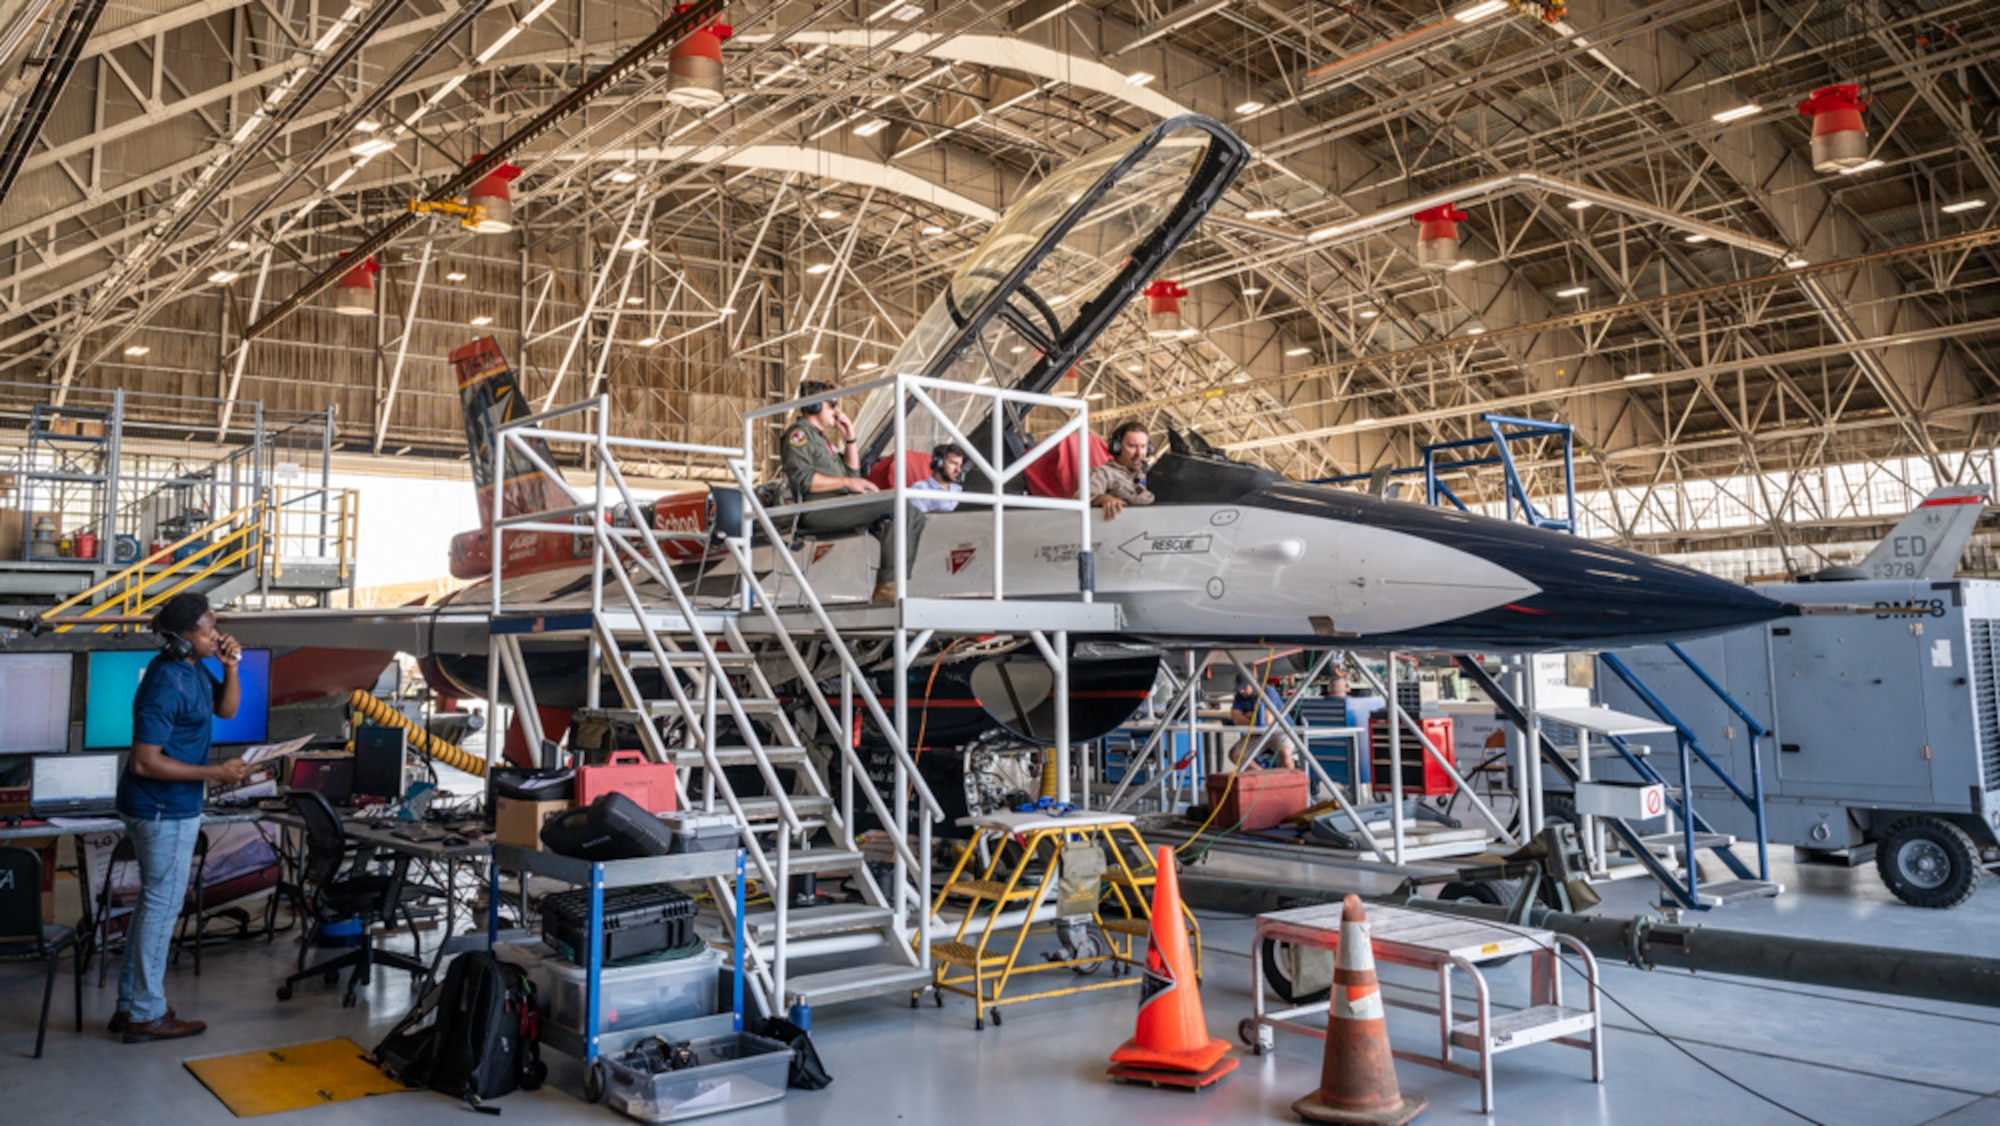 Crews from the U.S. Air Force Test Pilot School and Calspan work on the X-62, also known as the Variable In-flight Stability Test Aircraft, or VISTA, Aug. 3, at Edwards Air Force Base, California. (Air Force photo by Giancarlo Casem)